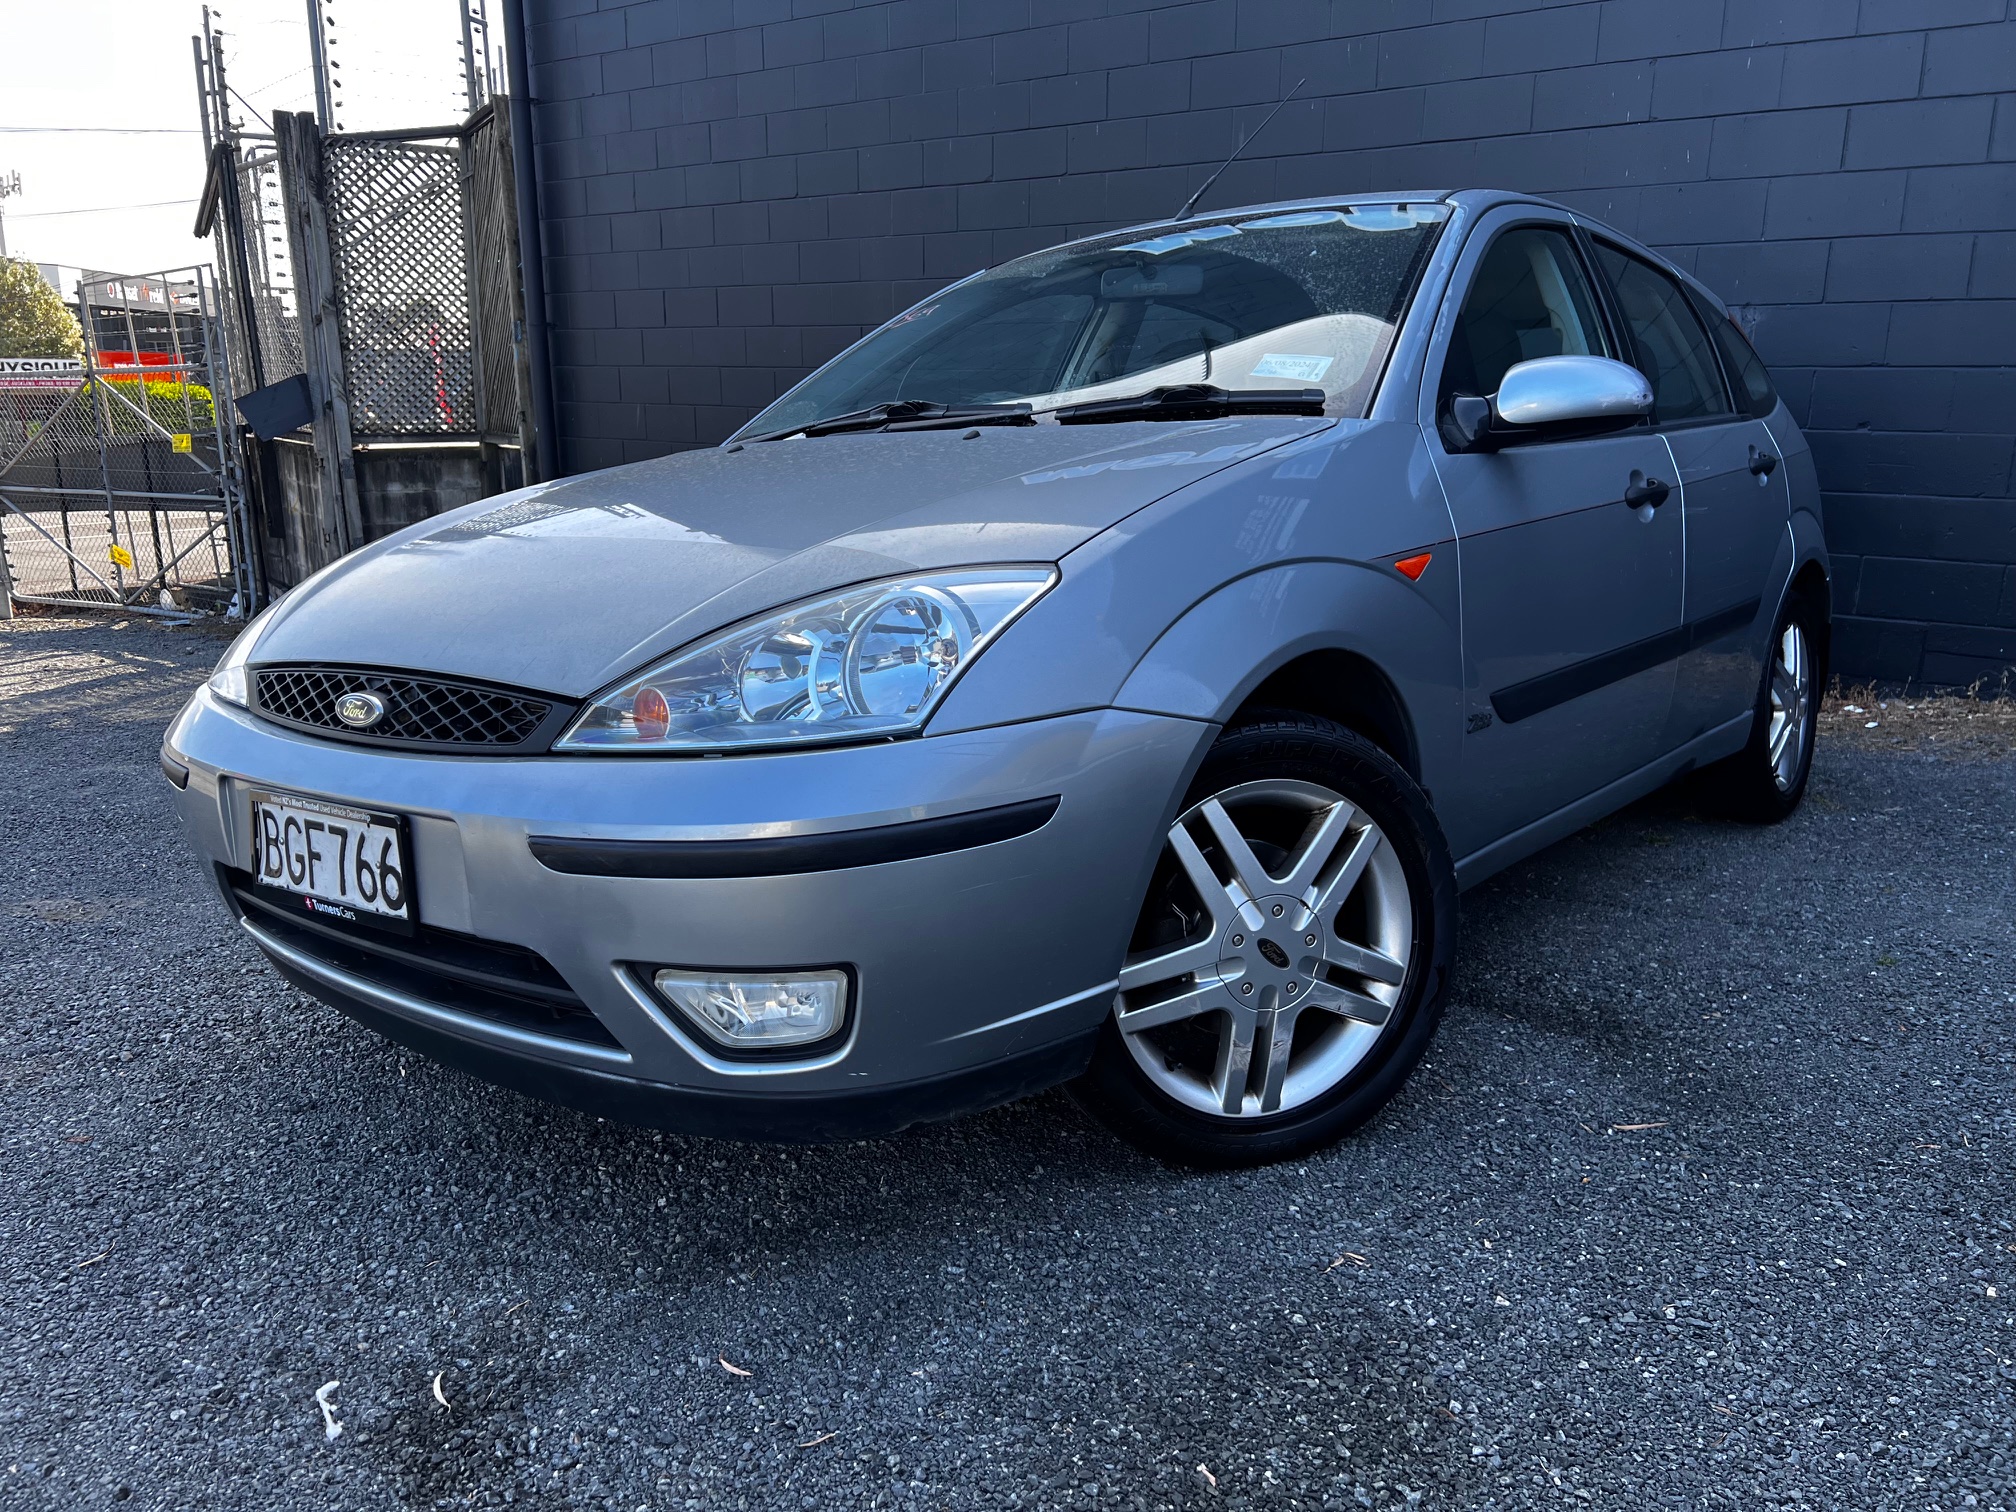 Ford Focus 2003 Image 1